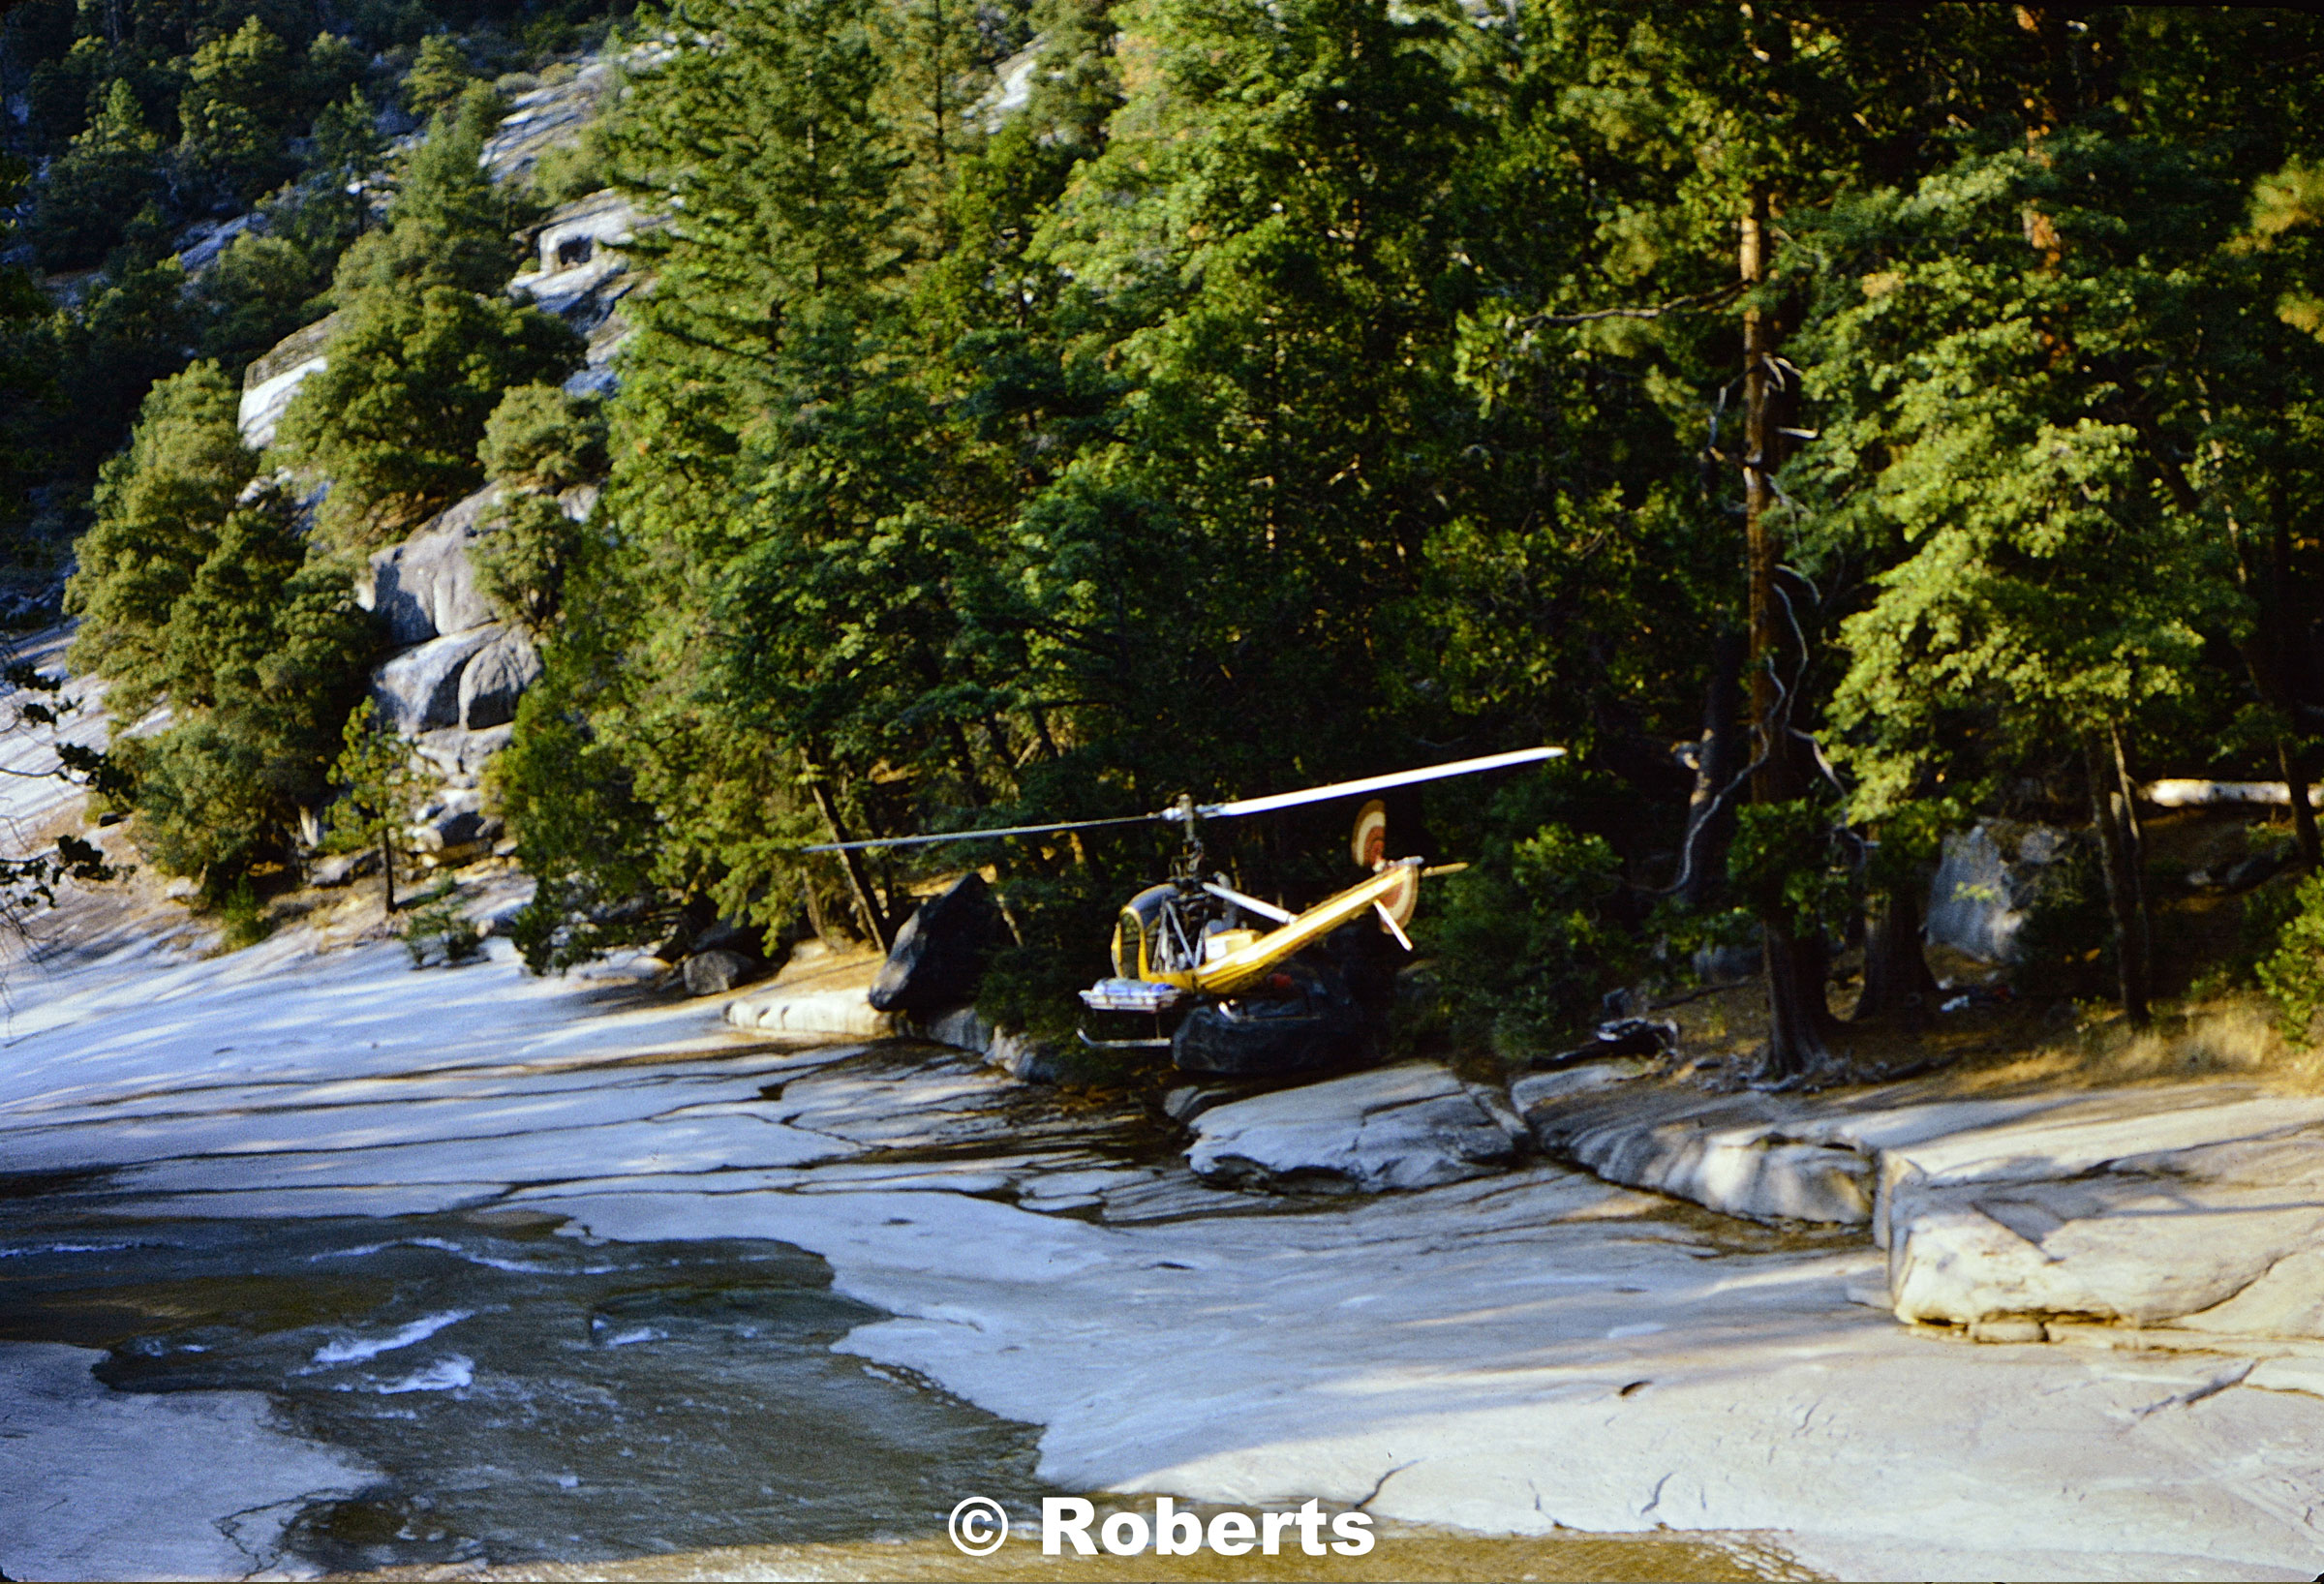 Helicopter Rescue, Emerald Pool/Vernal Falls, Yosemite National Park, California. Fall, 1974.